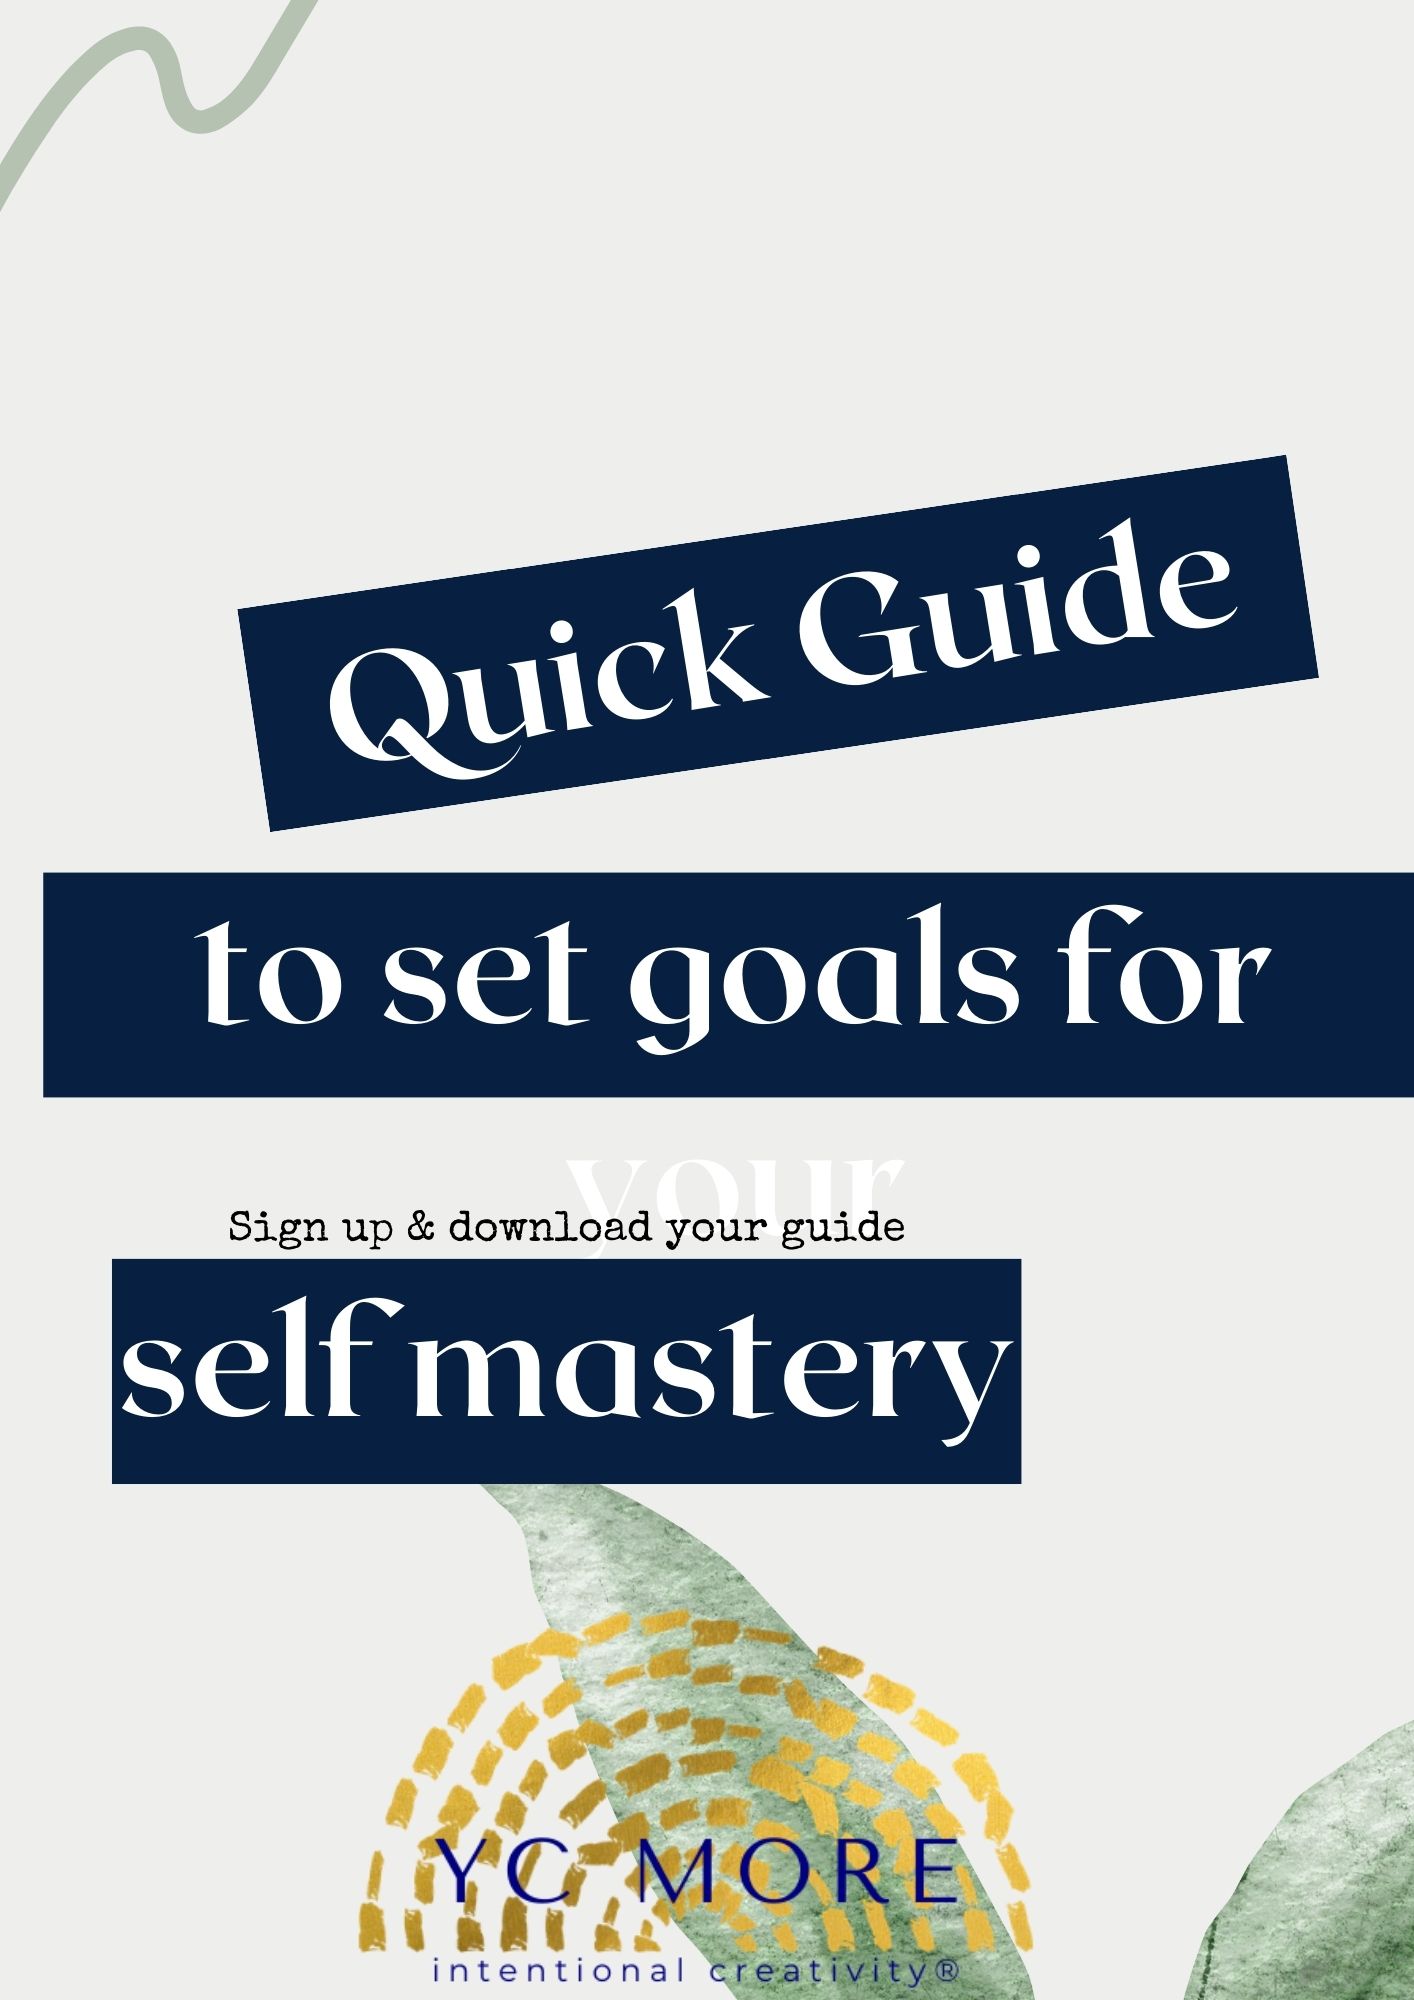 Quick guide to selfmastery